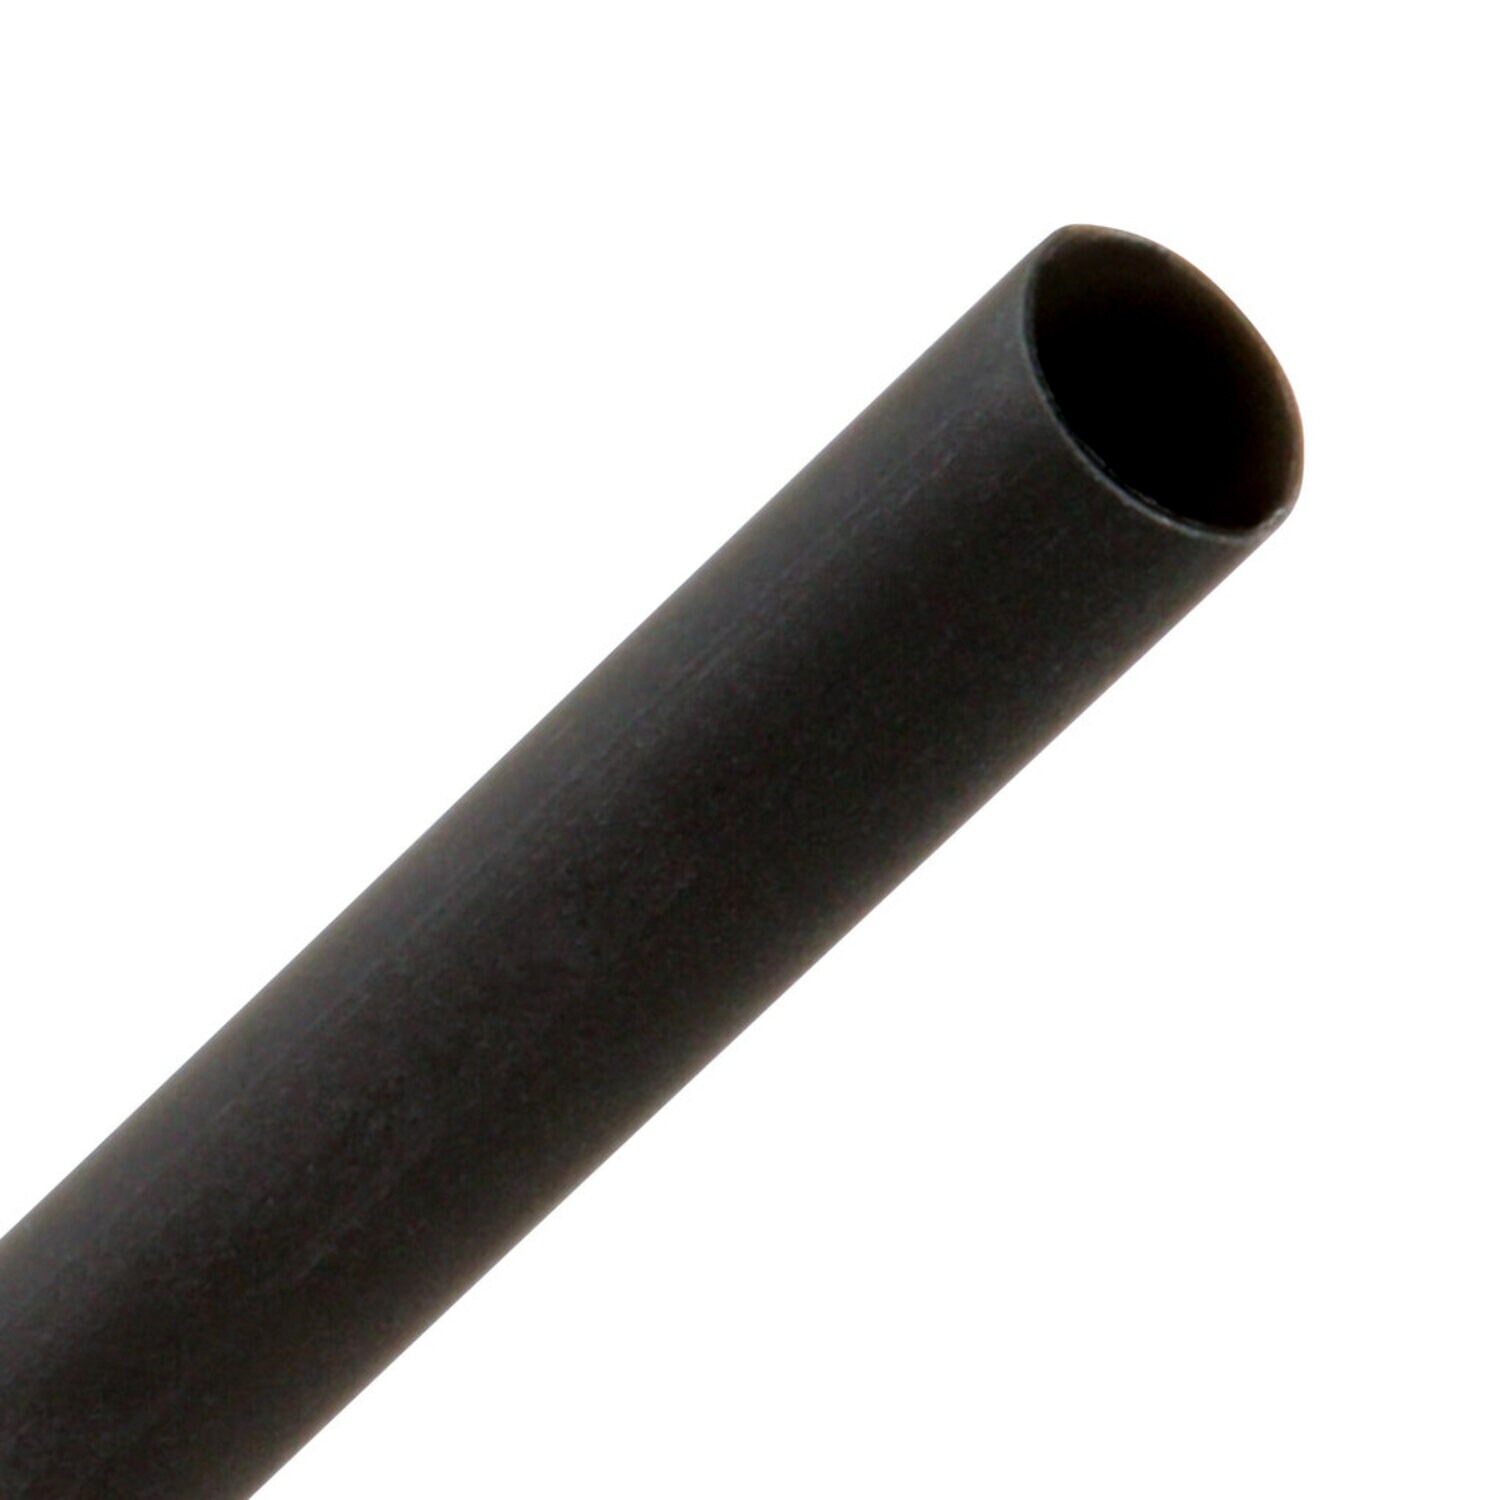 7000133614 - 3M Thin-Wall Heat Shrink Tubing EPS-300, Adhesive-Lined,
1/4-48"-Black-200 Pcs, 48 in length sticks, 200 pieces/case